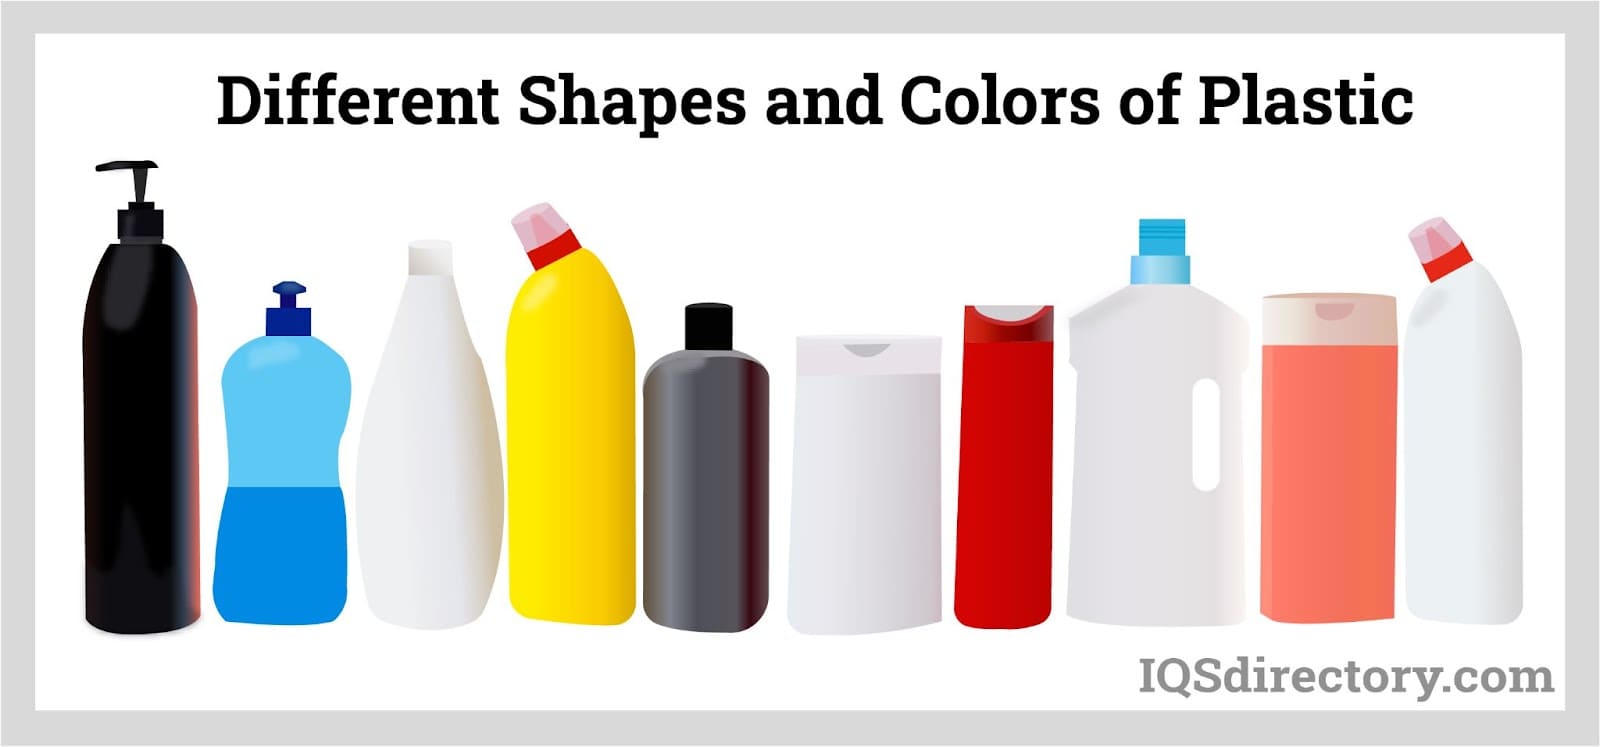 Different Shapes and Colors of Plastic